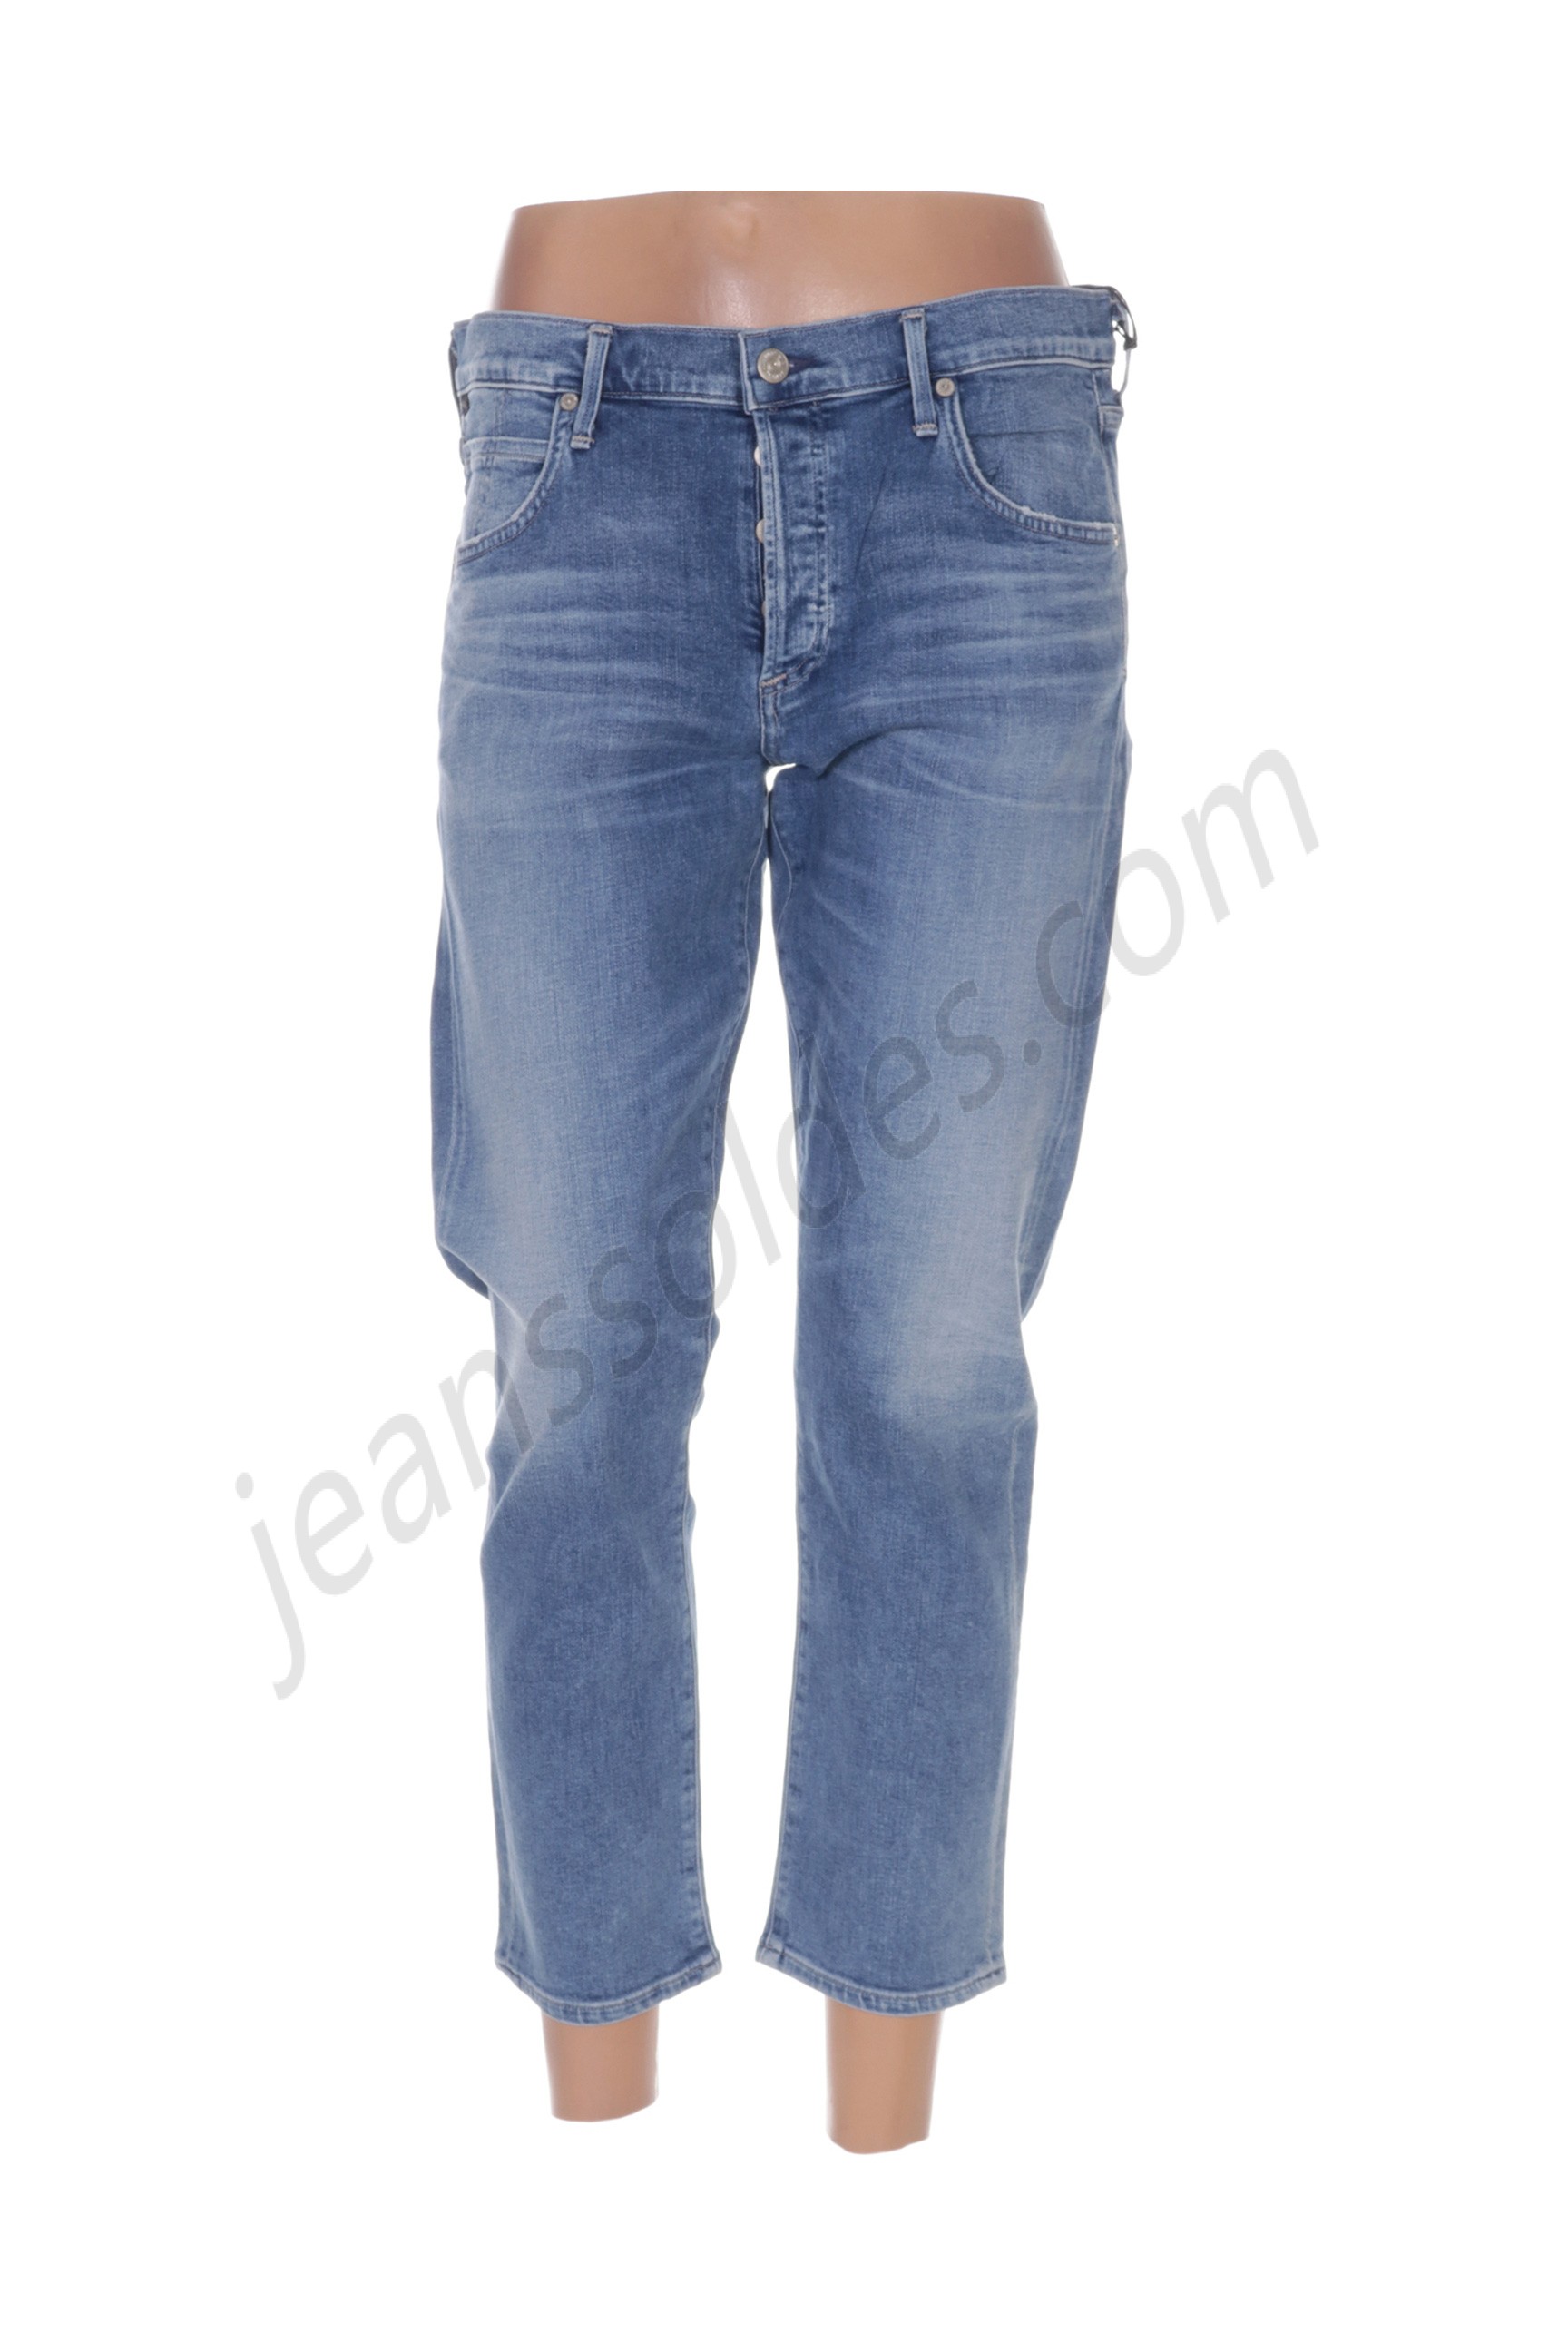 citizens of humanity-Jeans coupe slim prix d’amis - citizens of humanity-Jeans coupe slim prix d’amis